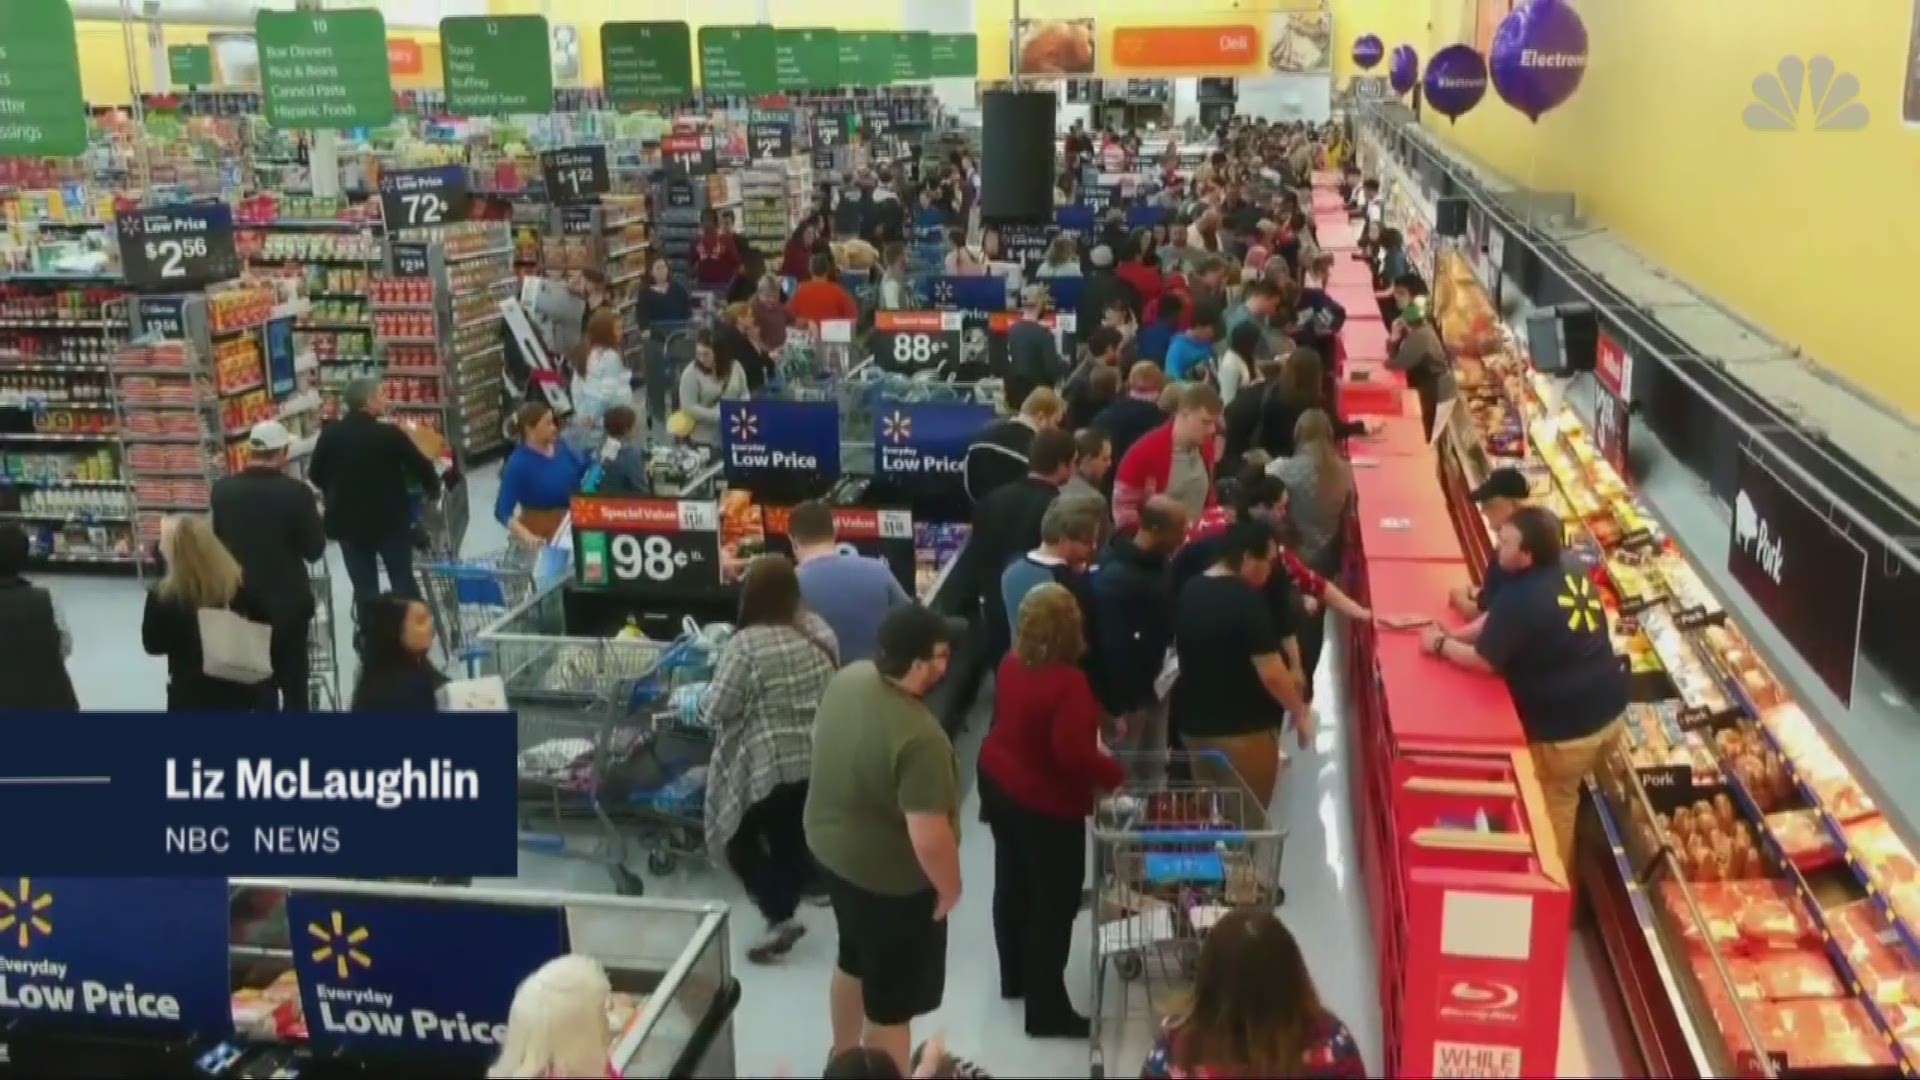 Black Friday is the most famous shopping holiday, but not always the best day to get deals! NBC News' Liz McLaughlin explains when you should buy toys, electronics and appliances to get the lowest price.